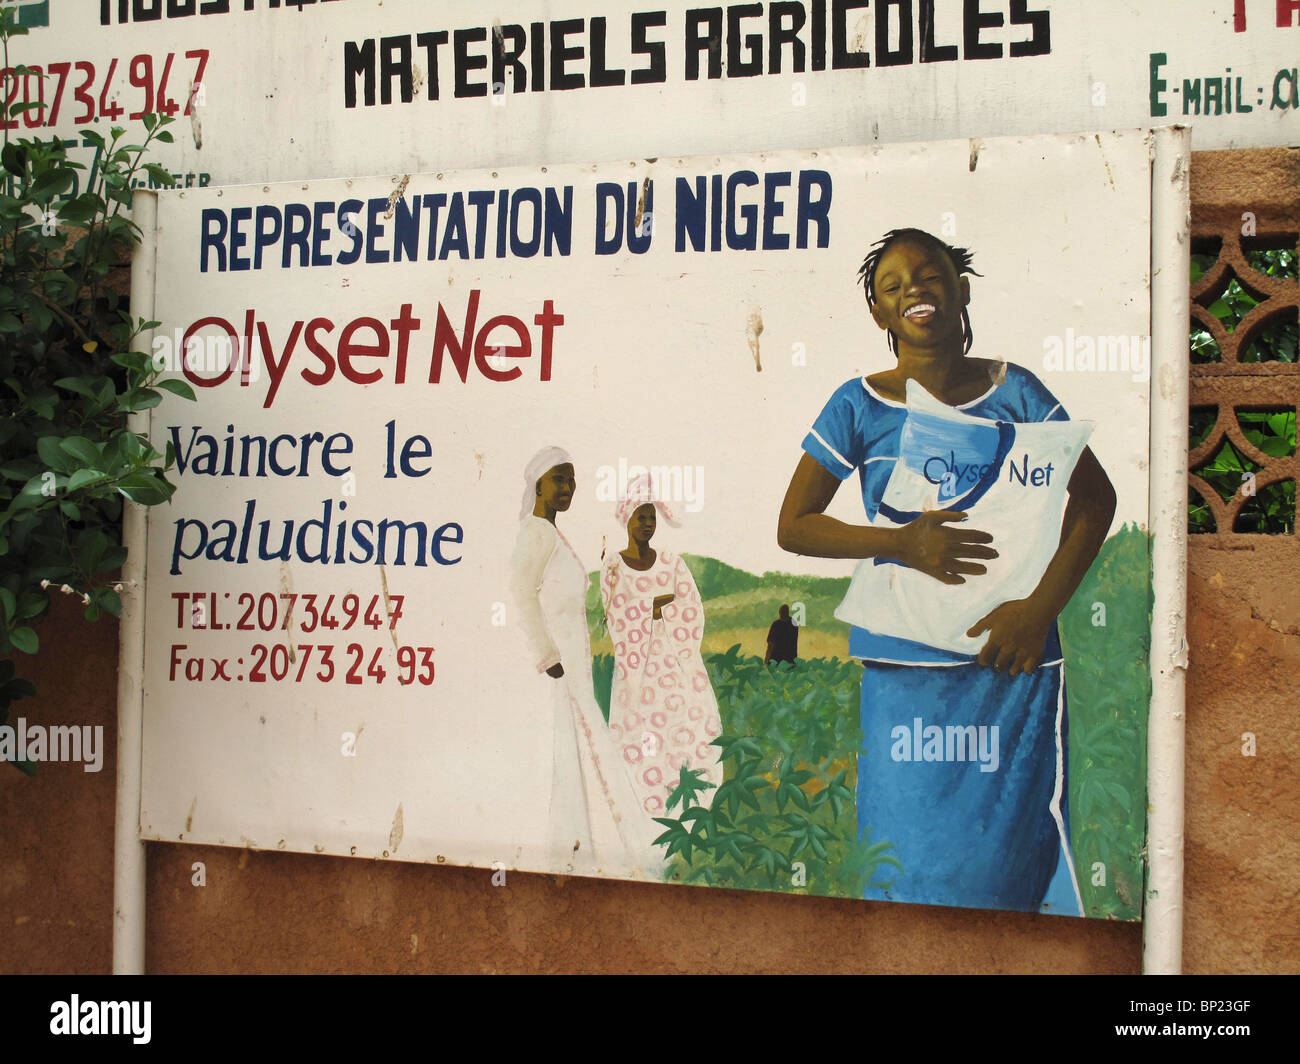 Niger August 2010. Advert for mosquito nets Stock Photo